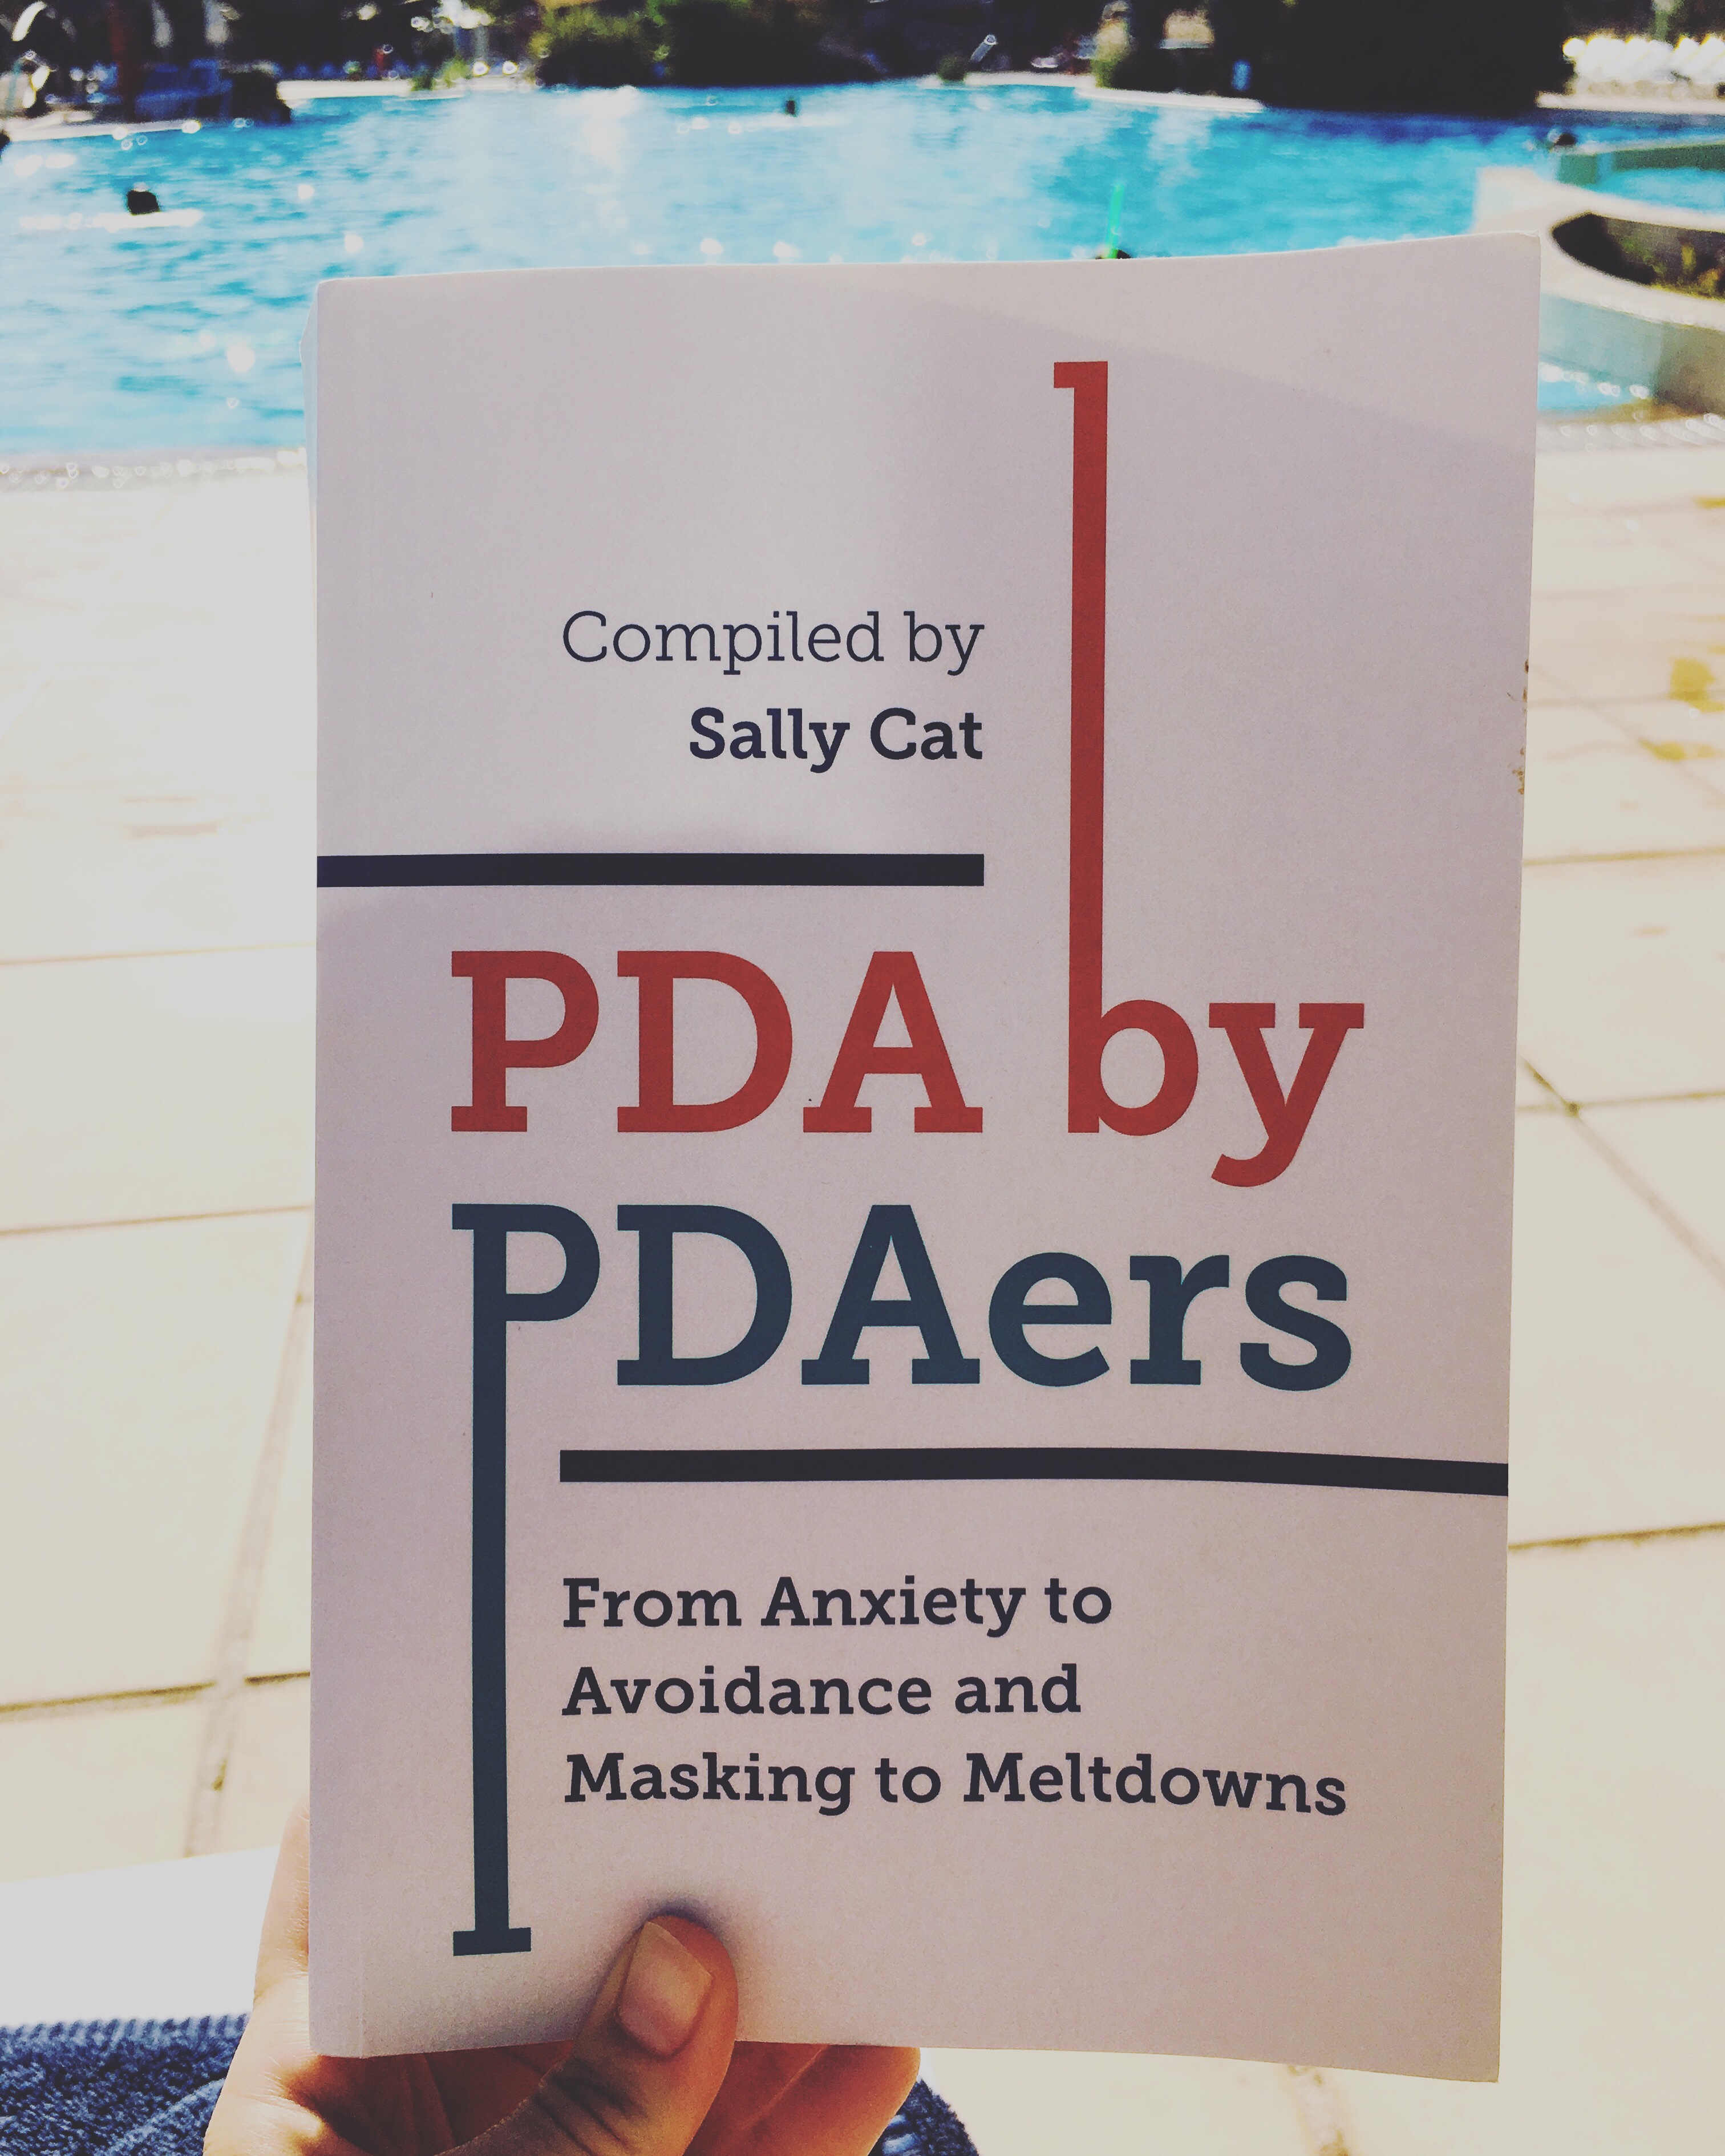 PDA by PDAers – A Book Review